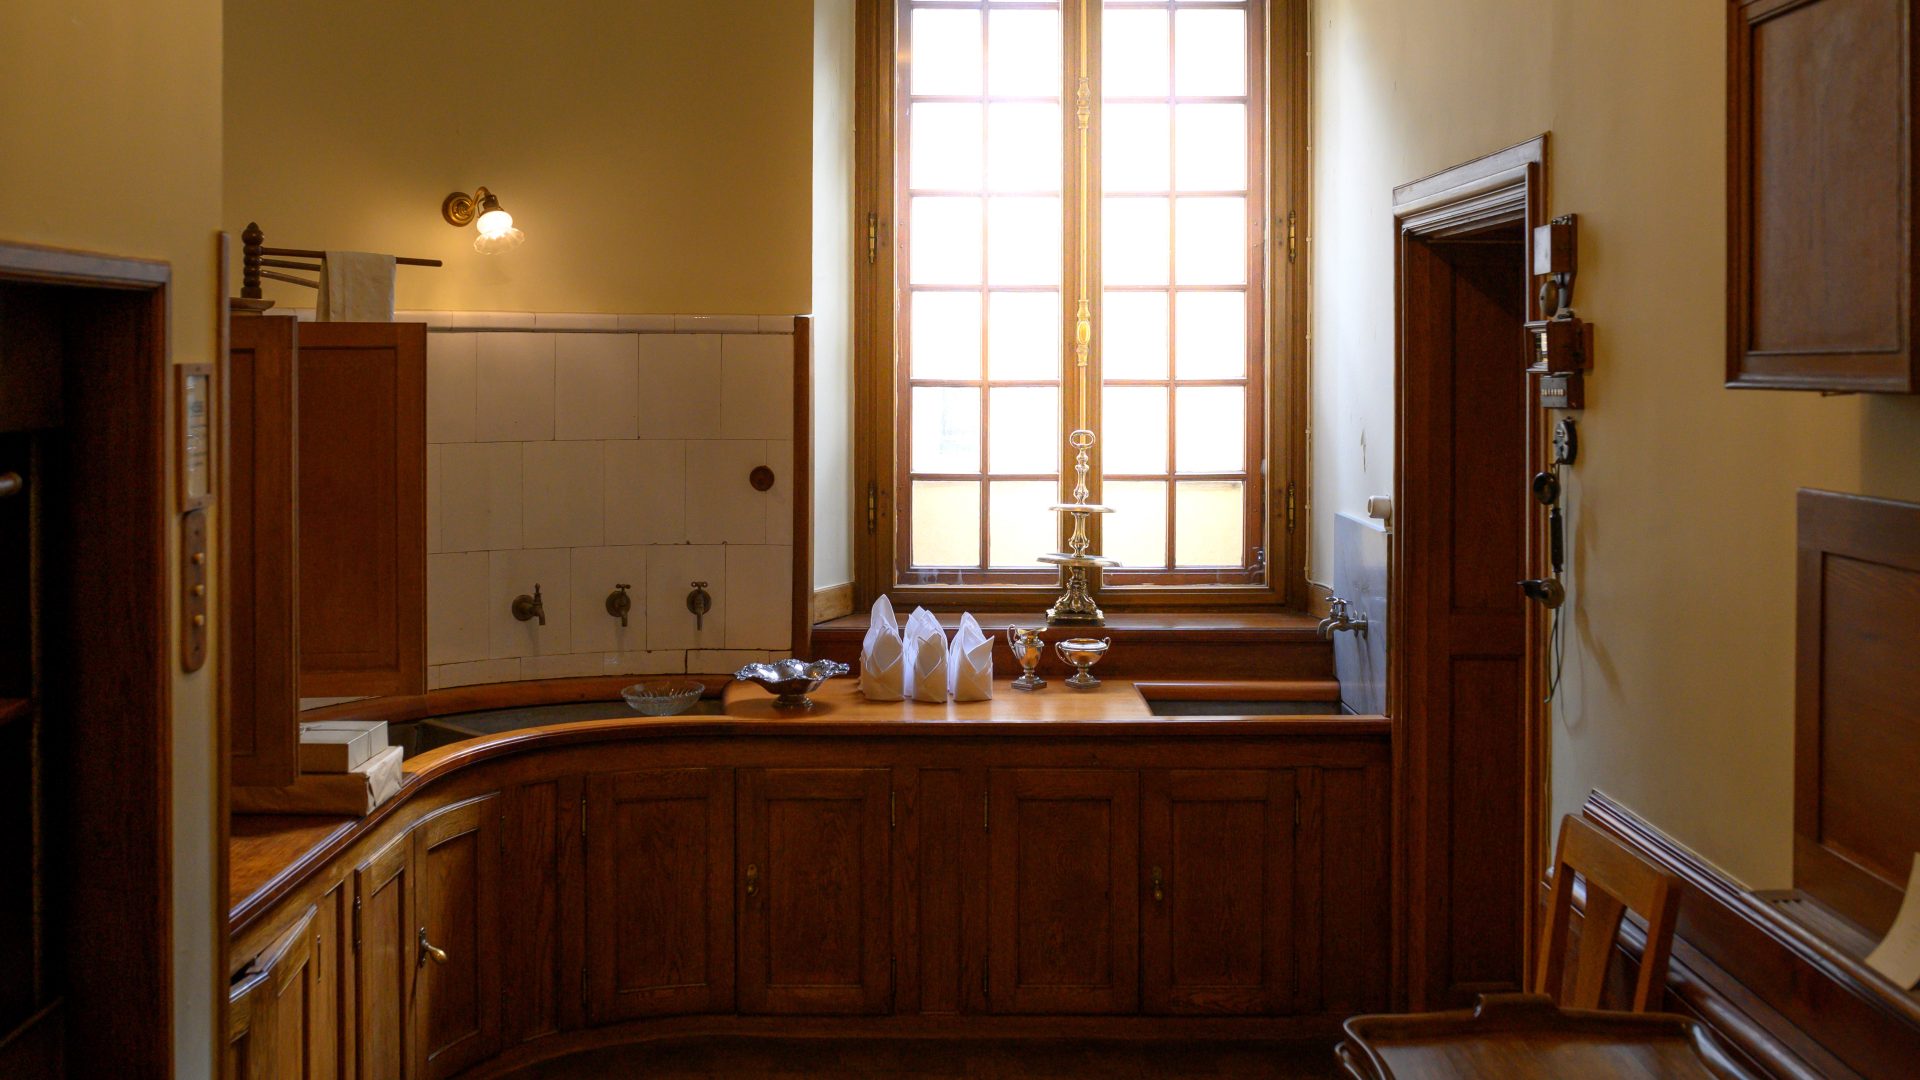 A room with yellow walls and a window. Along the sides a sink and water taps